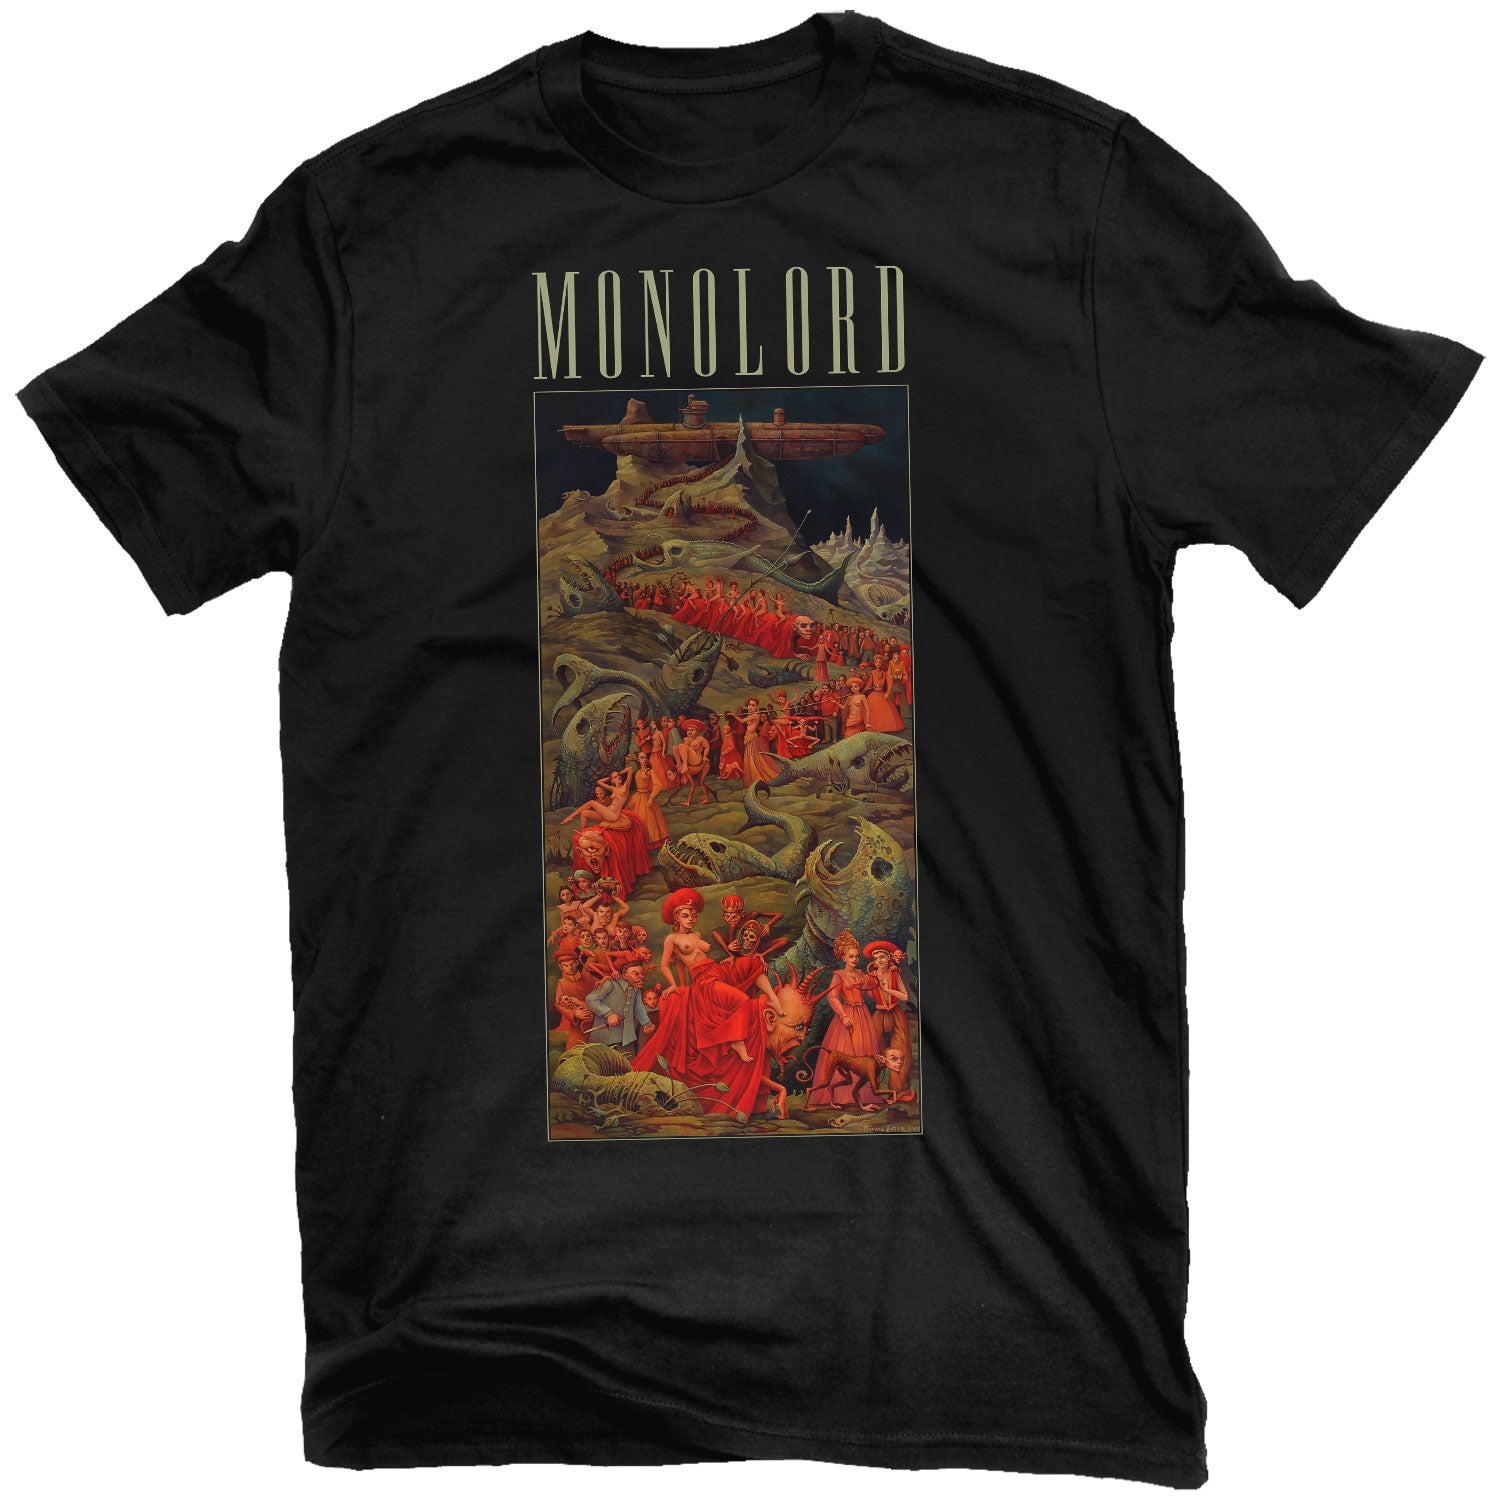 Monolord "I'm Staying Home" T-Shirt